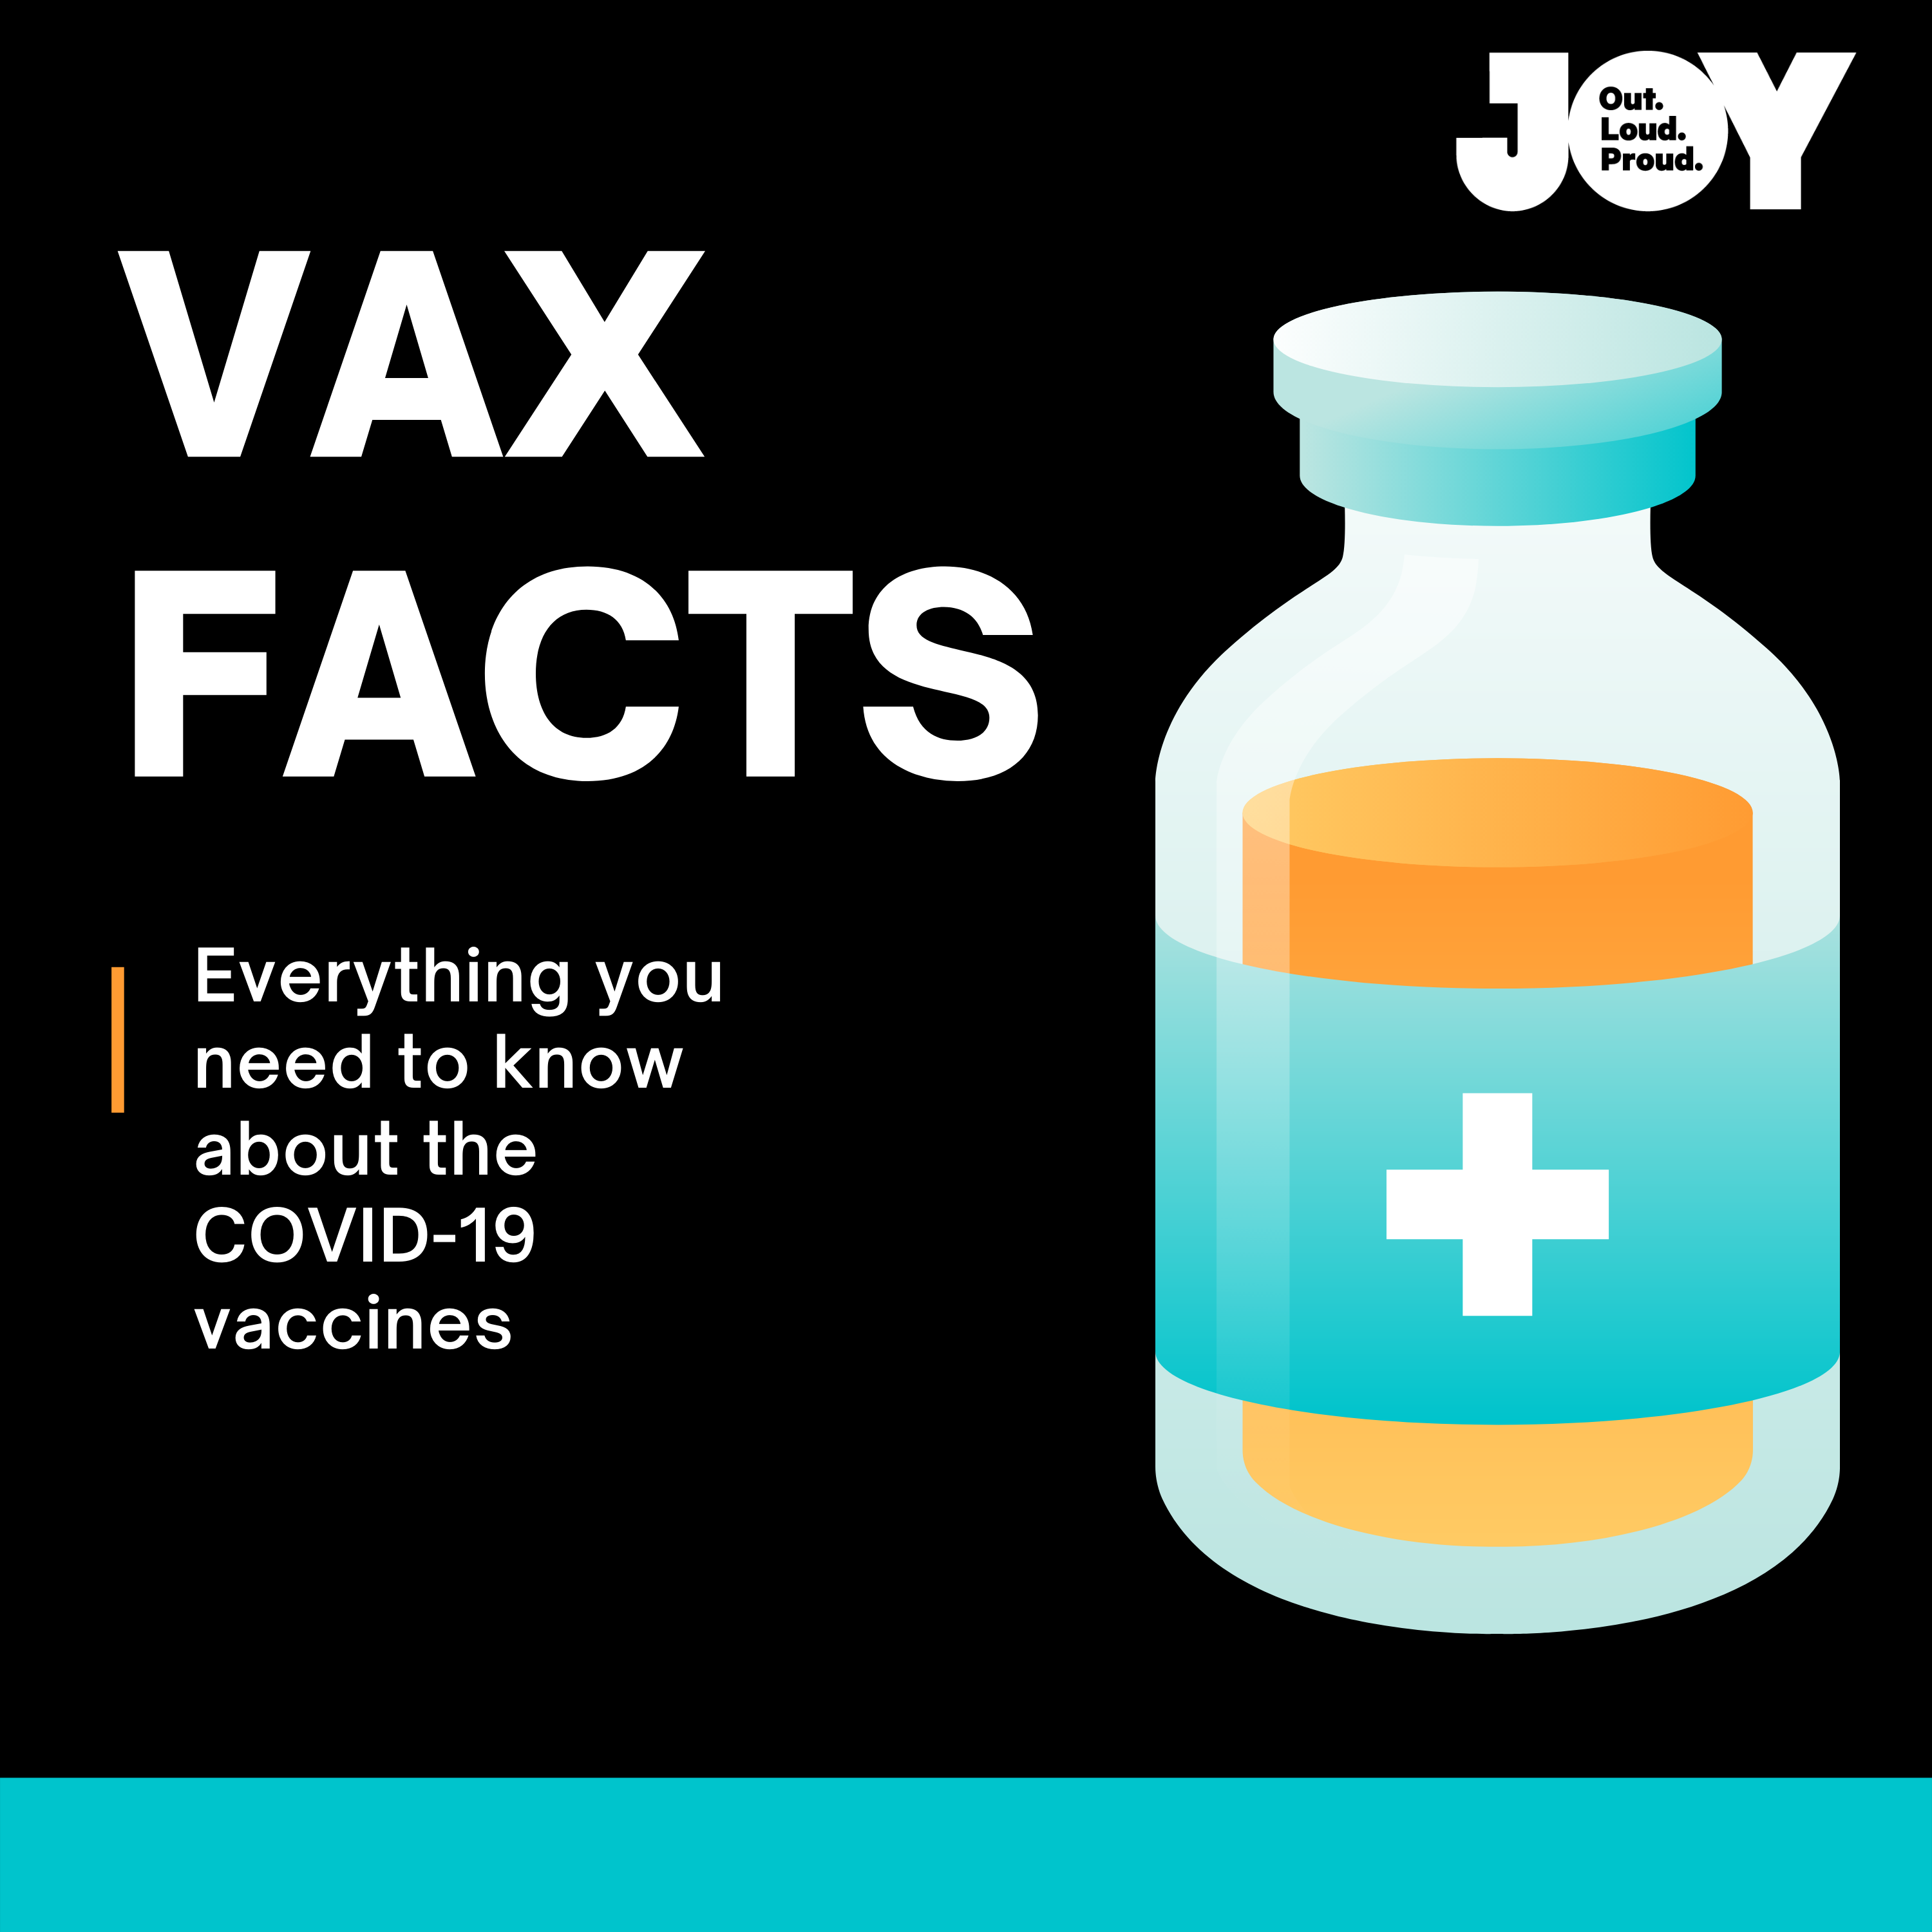 Episode 3 – Who Can’t Get The Vax?